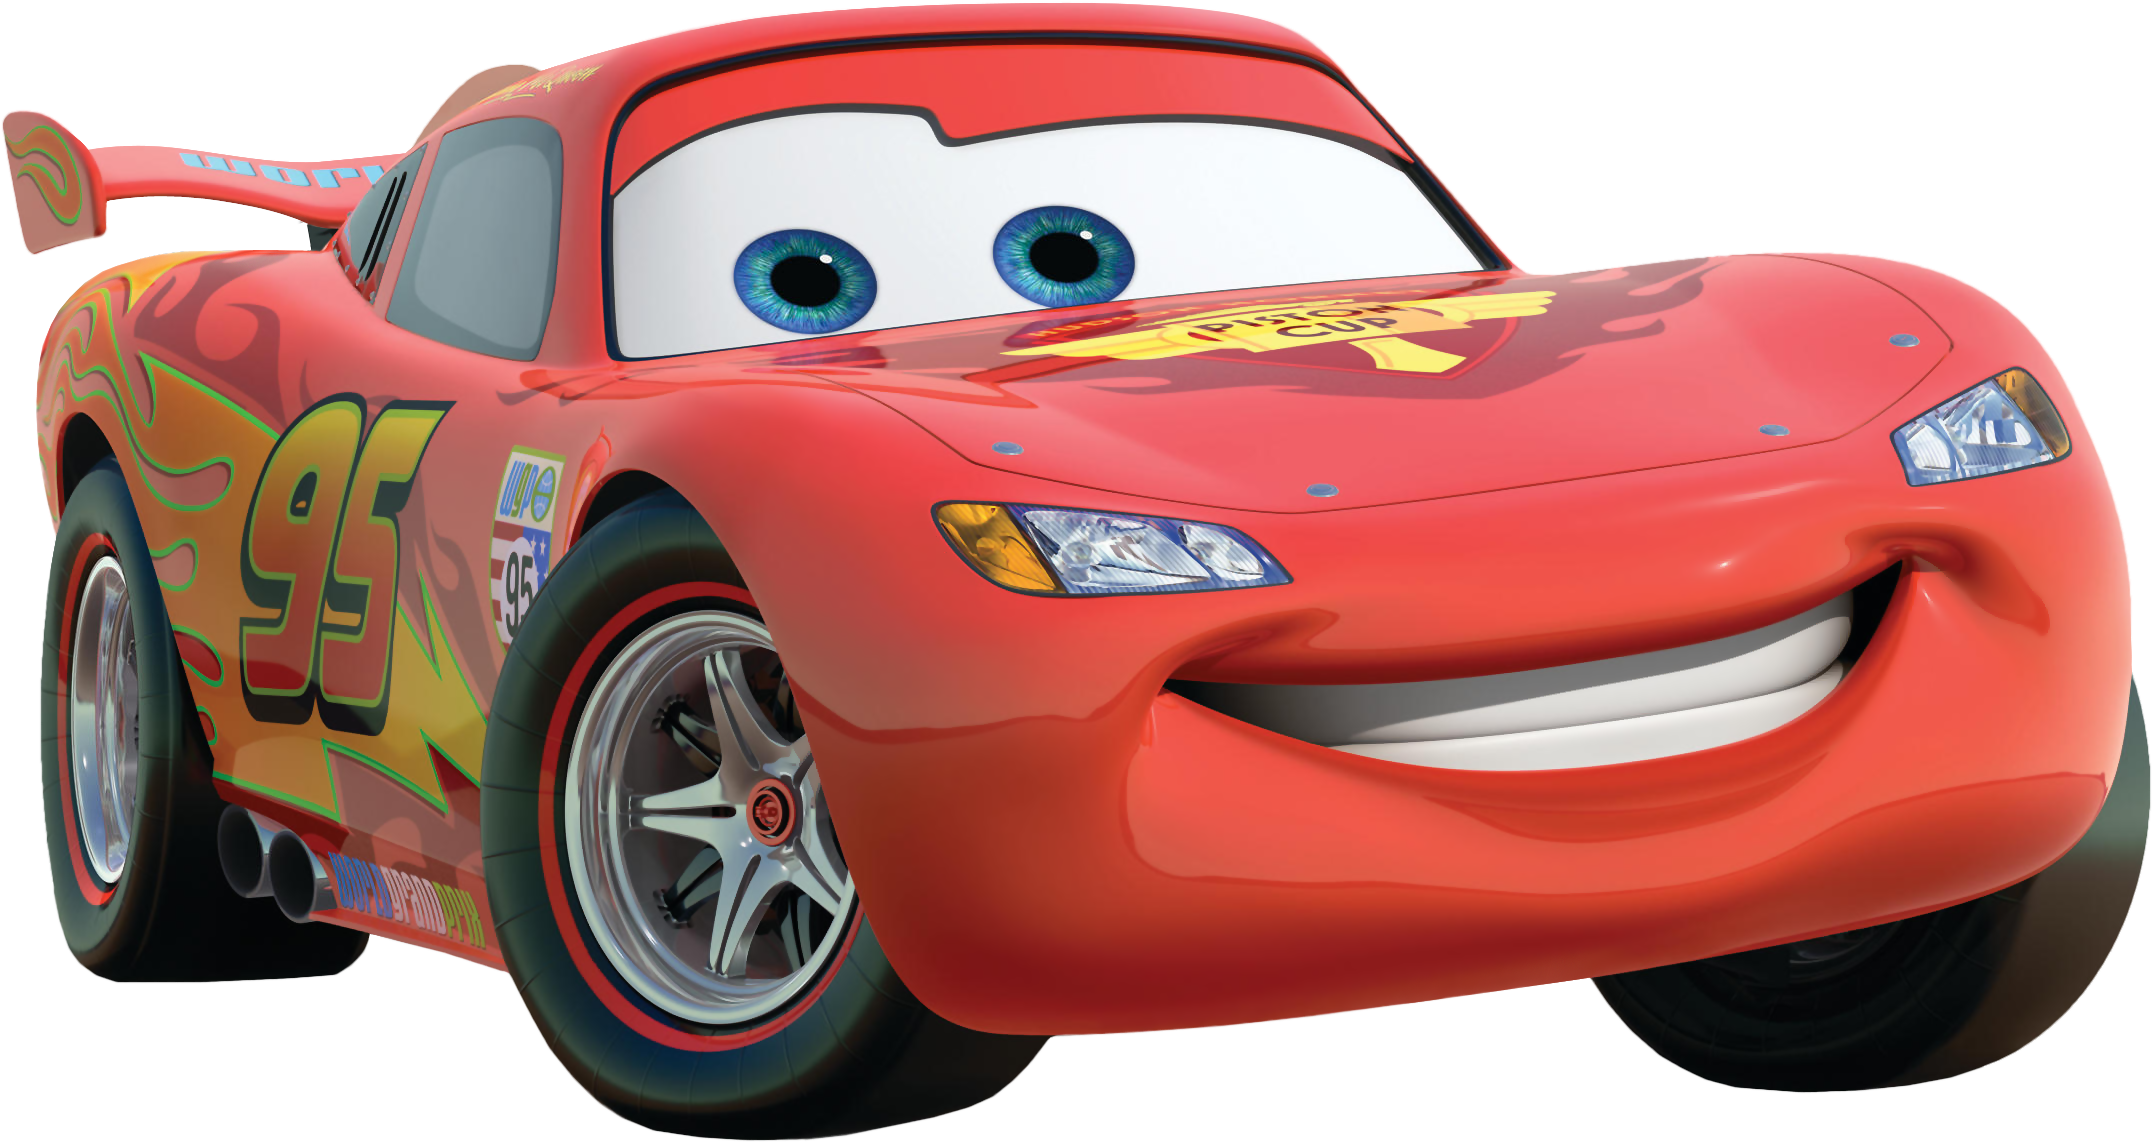 Here's The Real Character - Cars 2 Lightning Mcqueen (2656x1480)